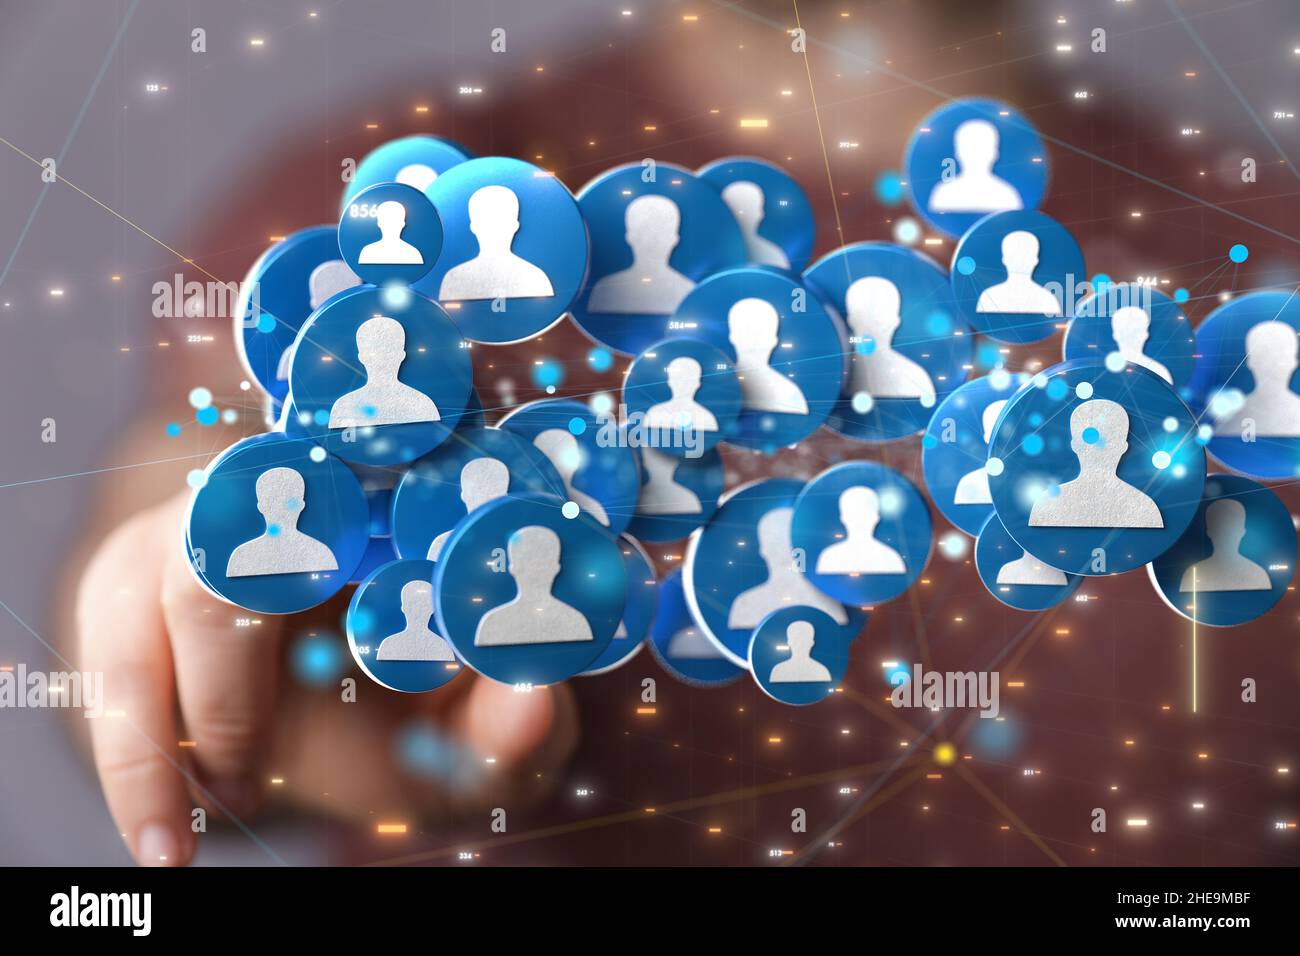 Shallow focus of a human hand pointing on human icons, team networking concept Stock Photo